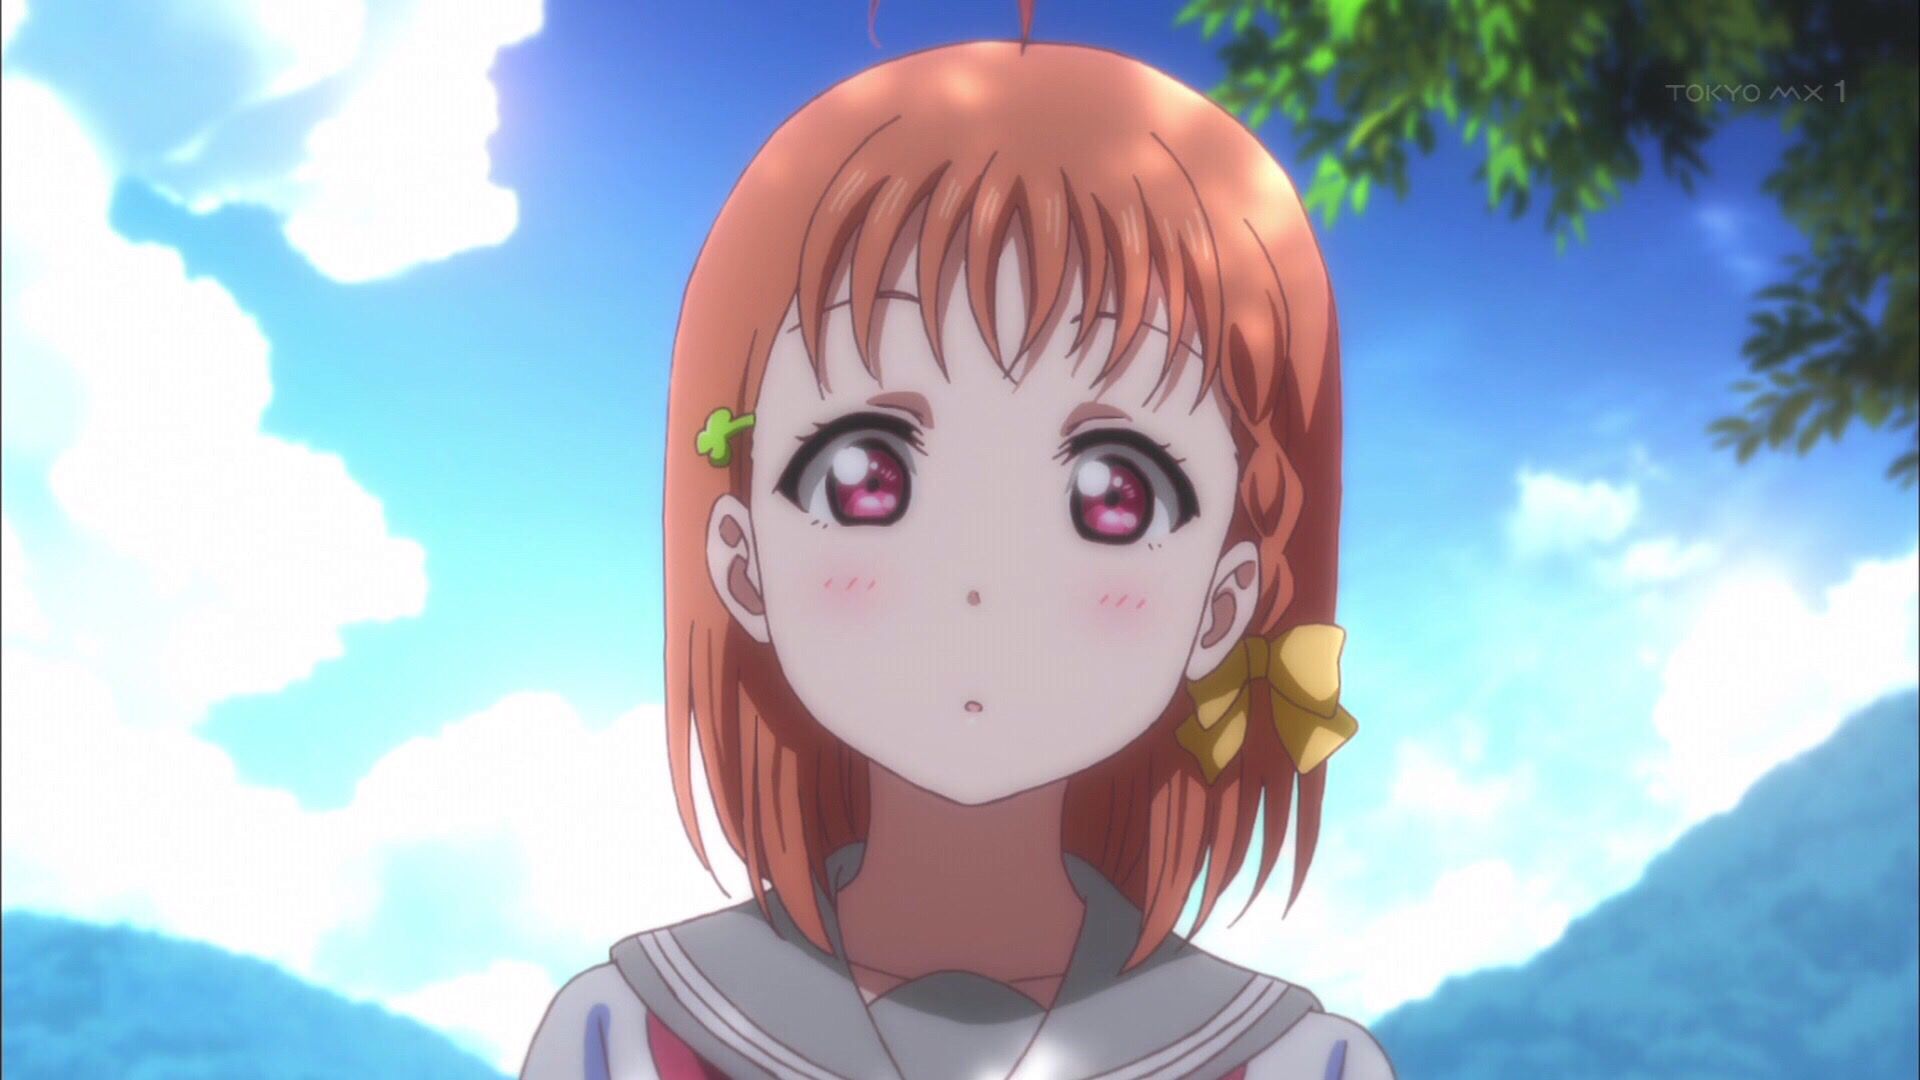 [Image] "love live! Sunshine "1000 songs she bend was its cute scene image competitions wwwwwwwwww 2